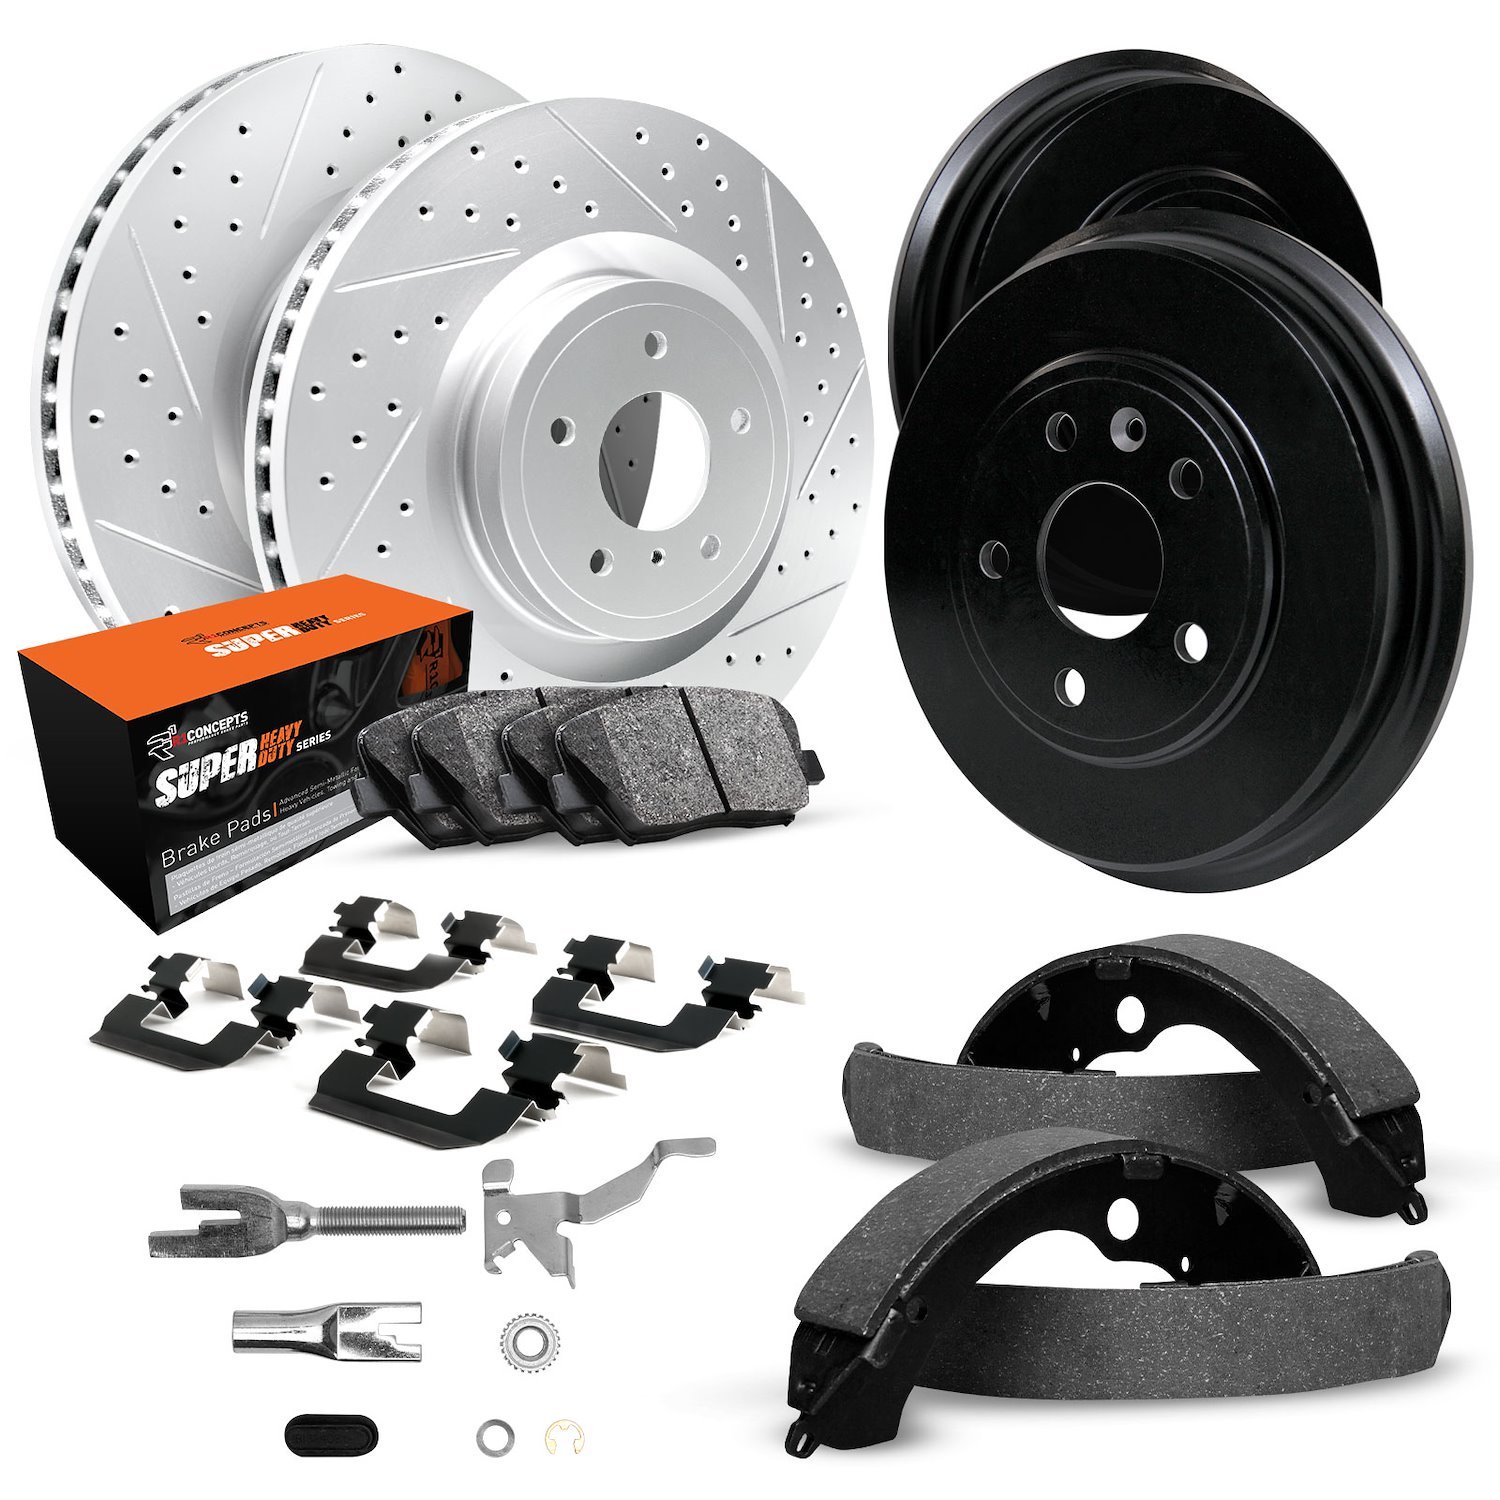 GEO-Carbon Drilled/Slotted Rotors/Drums w/Super-Duty Pads/Shoes/Hardware/Adjusters, Lexus/Toyota/Scion, Position: Front/Rear